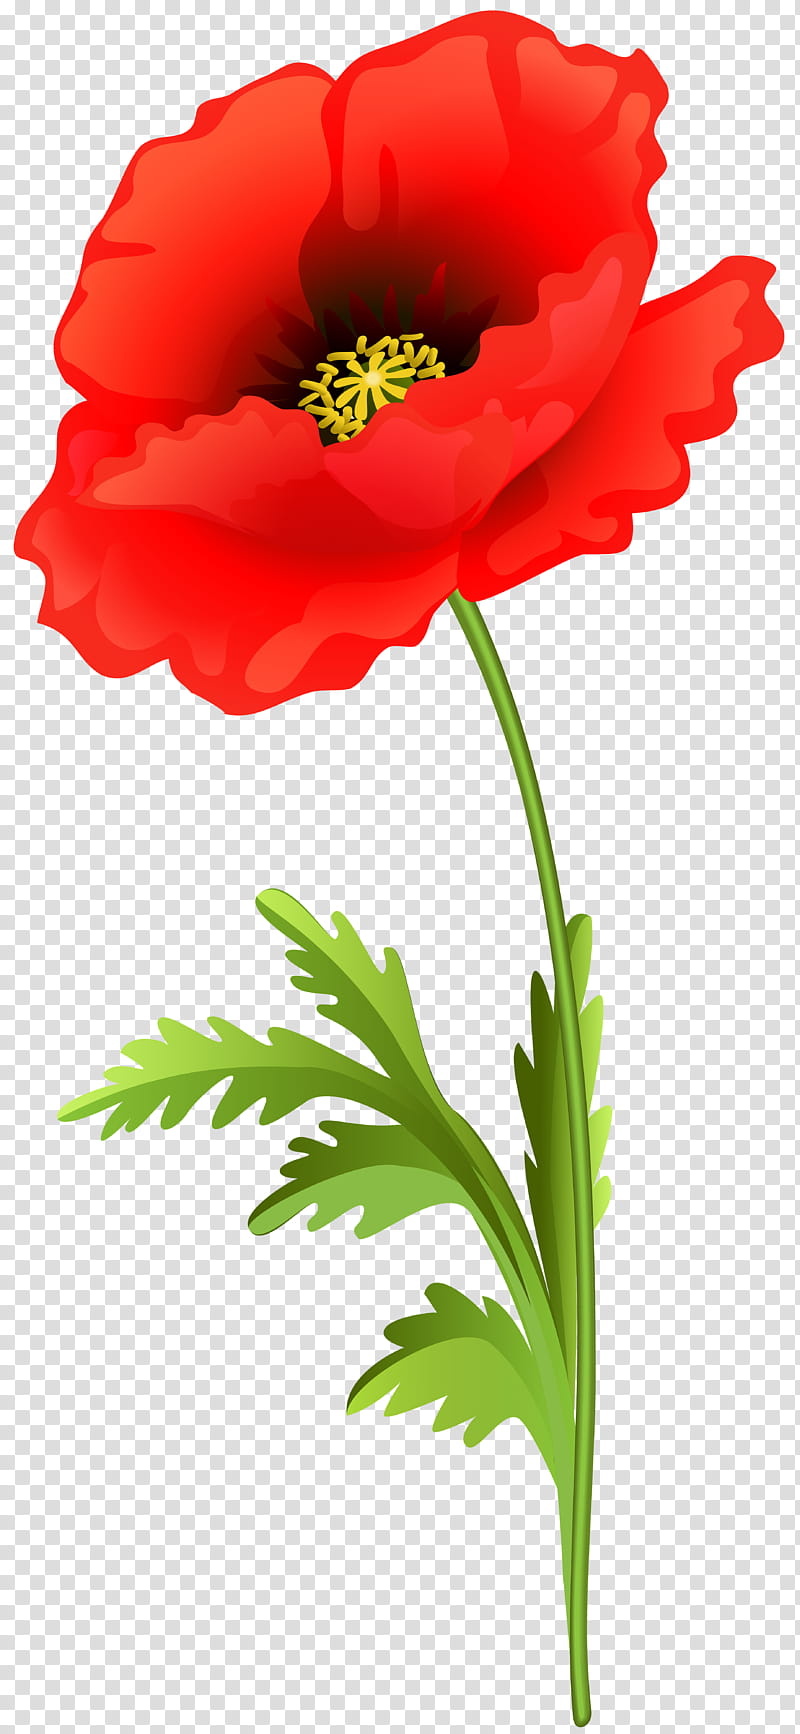 Drawing Of Family Poppy Flower Common Poppy Floral Design White Poppy Petal Red Transparent Background Png Clipart Hiclipart